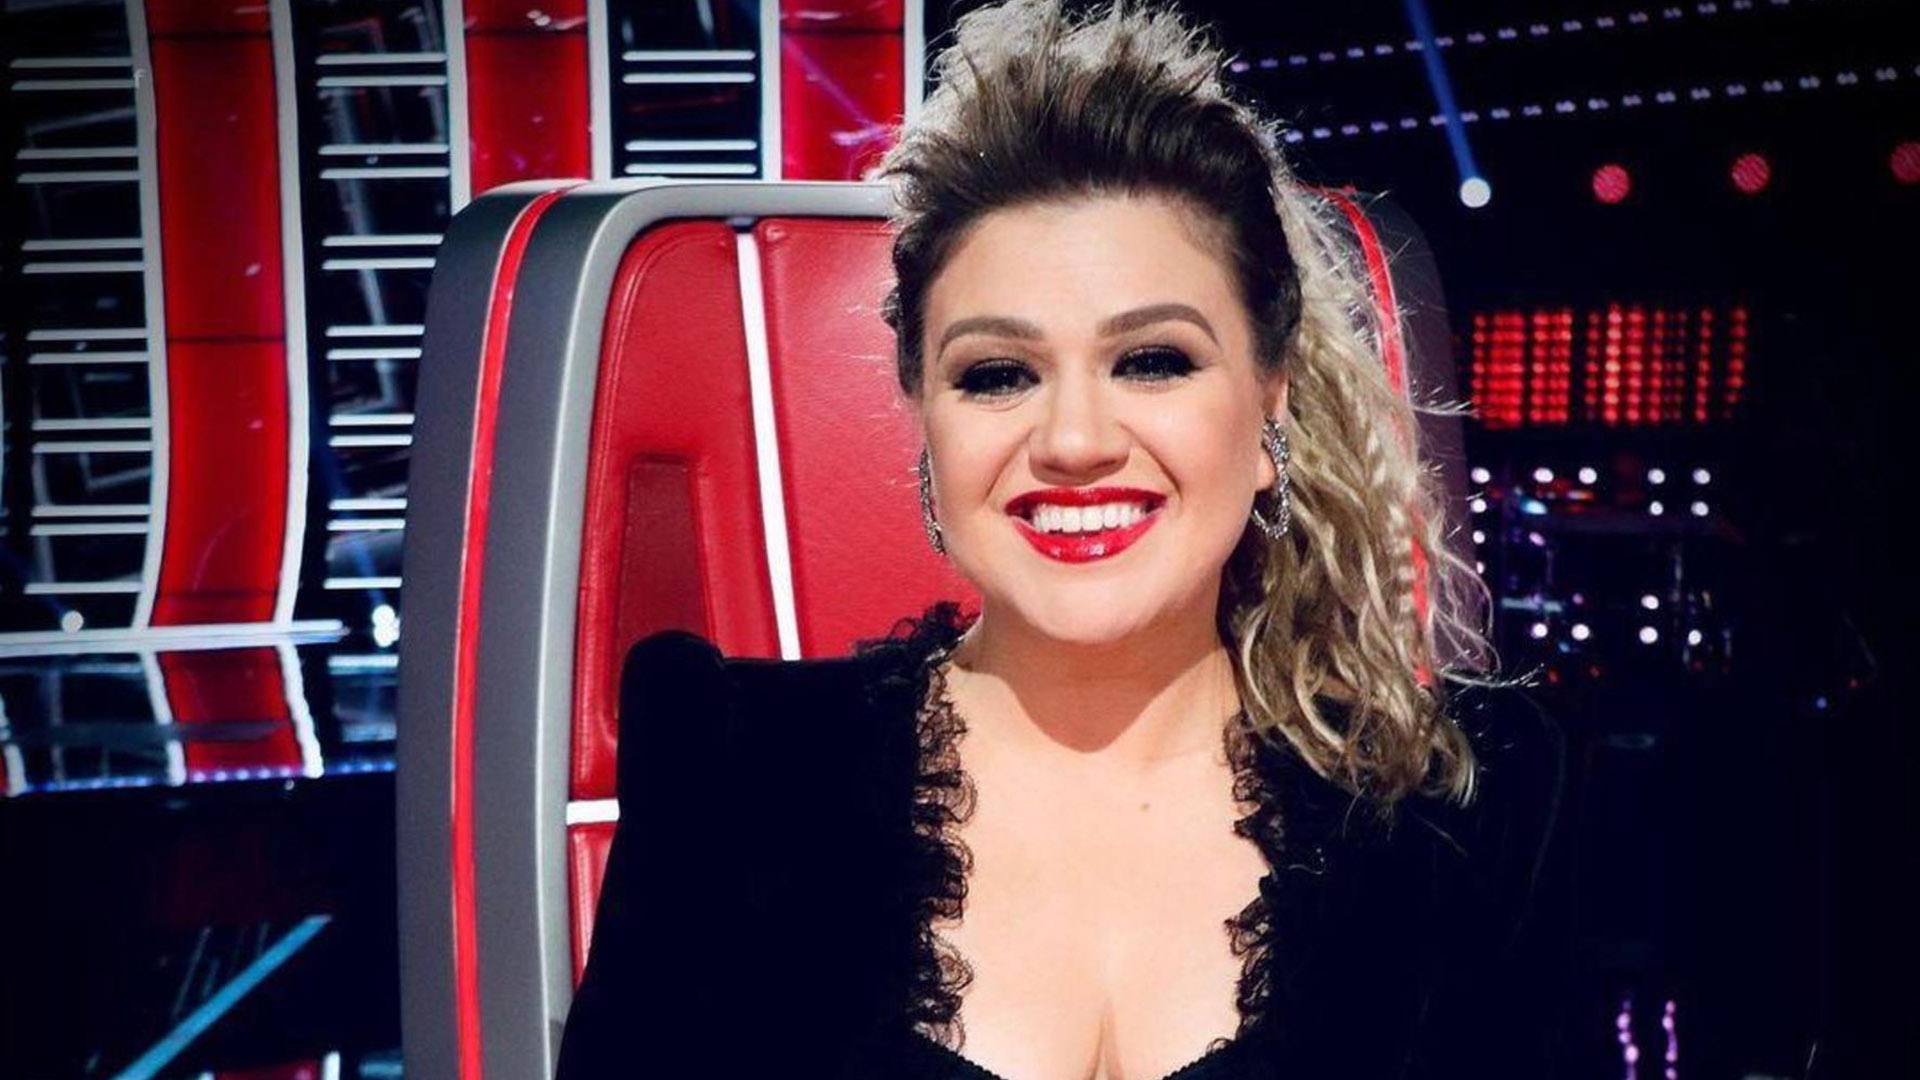 Kelly Clarkson's The Voice Salary Puts Her American Idol Paycheck to Shame